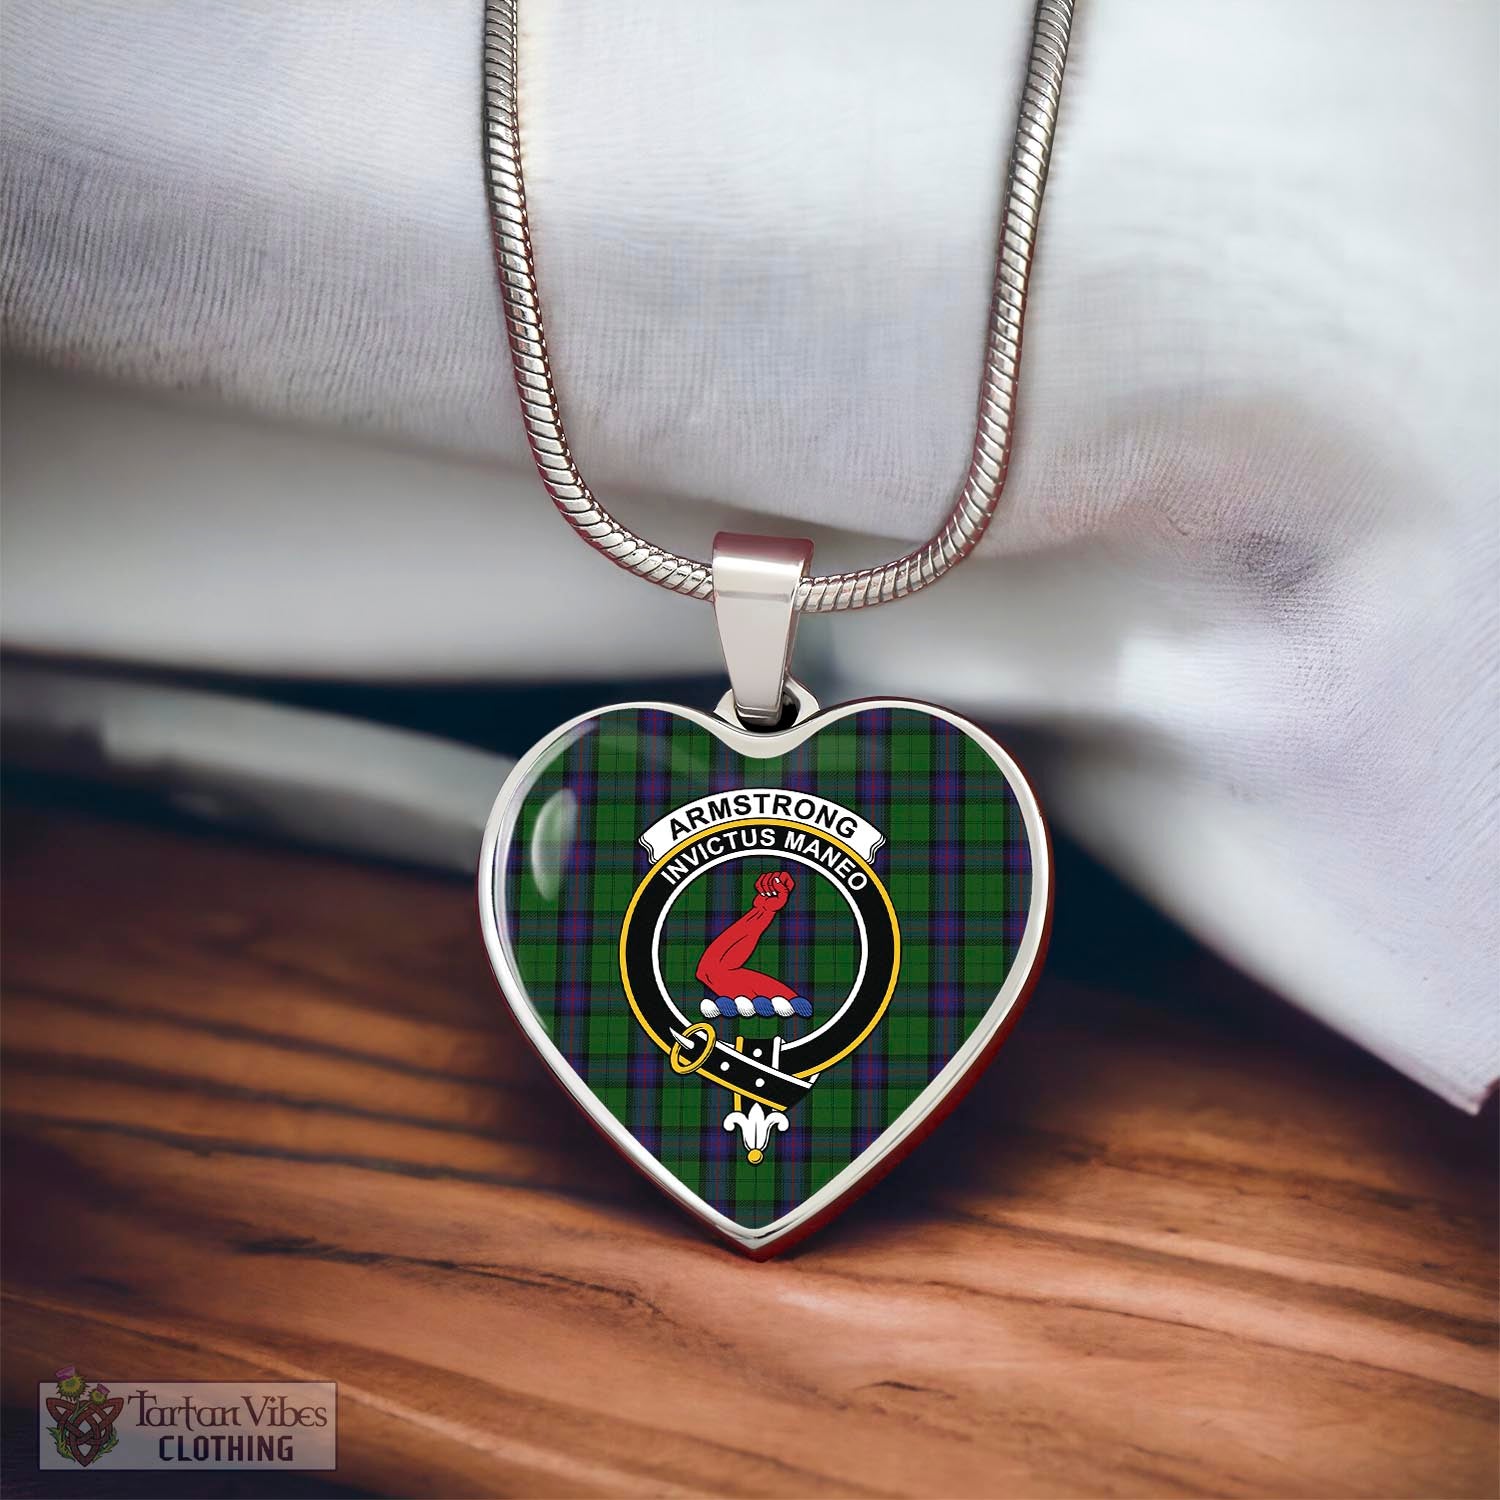 Tartan Vibes Clothing Armstrong Tartan Heart Necklace with Family Crest